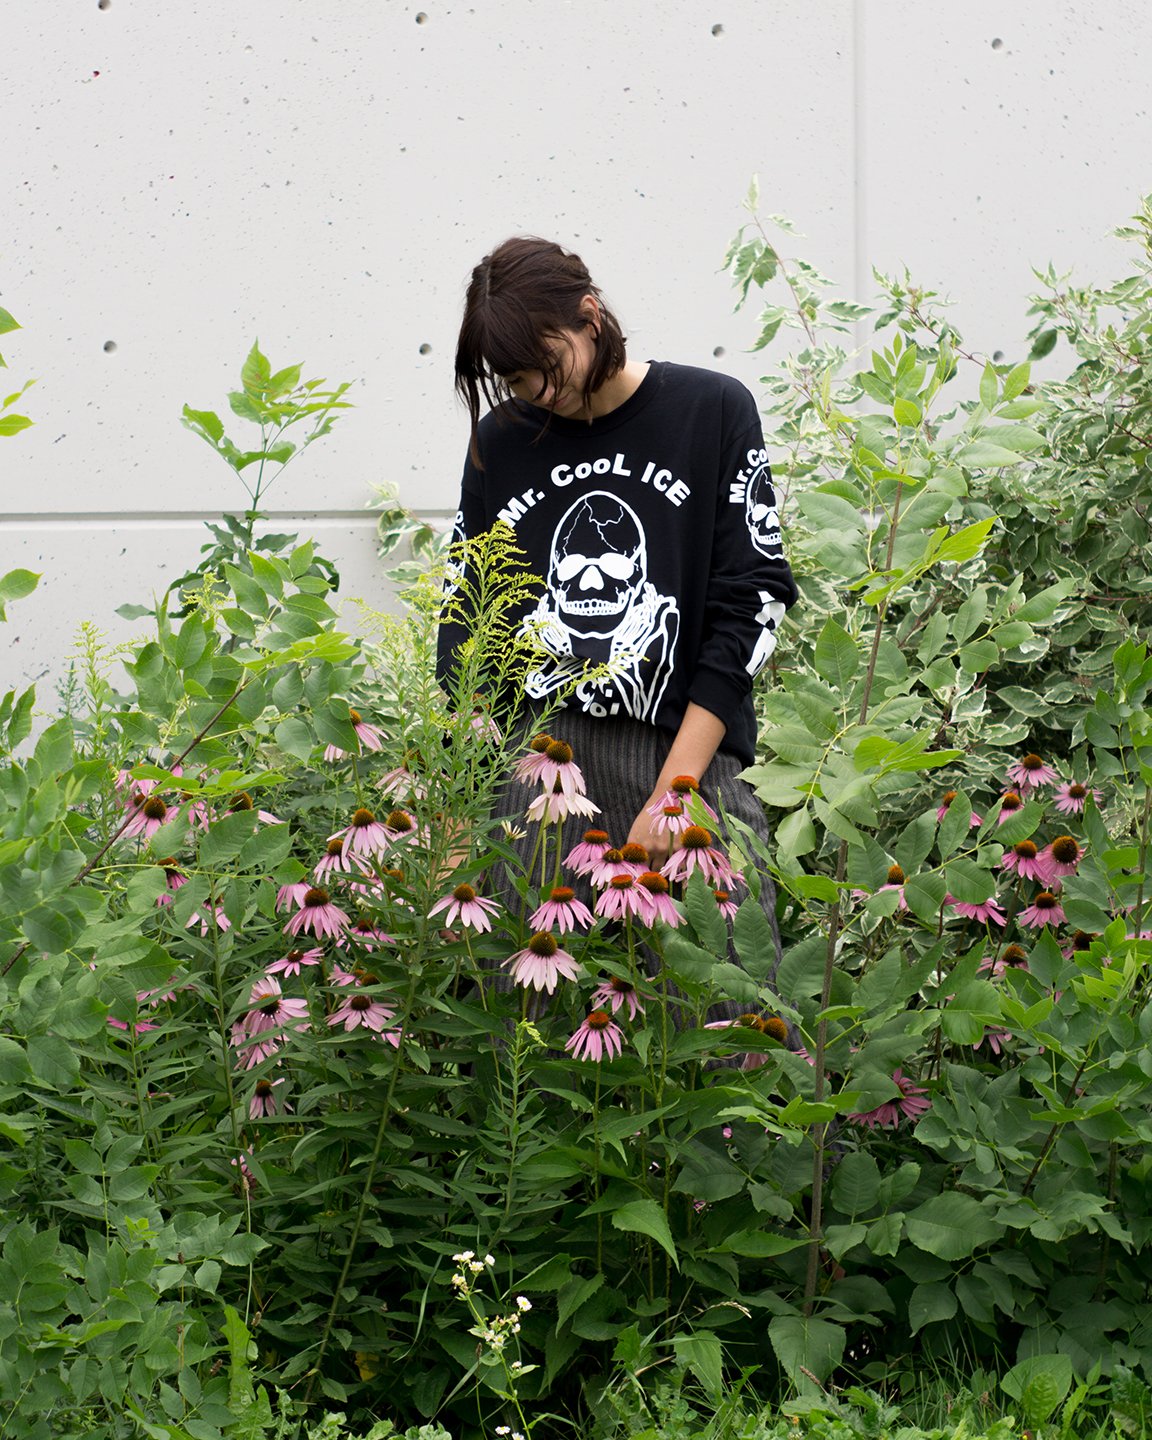 The No Fun® "Mr. Cool Ice" longsleeve shirt worn by a young woman, standing in a garden.